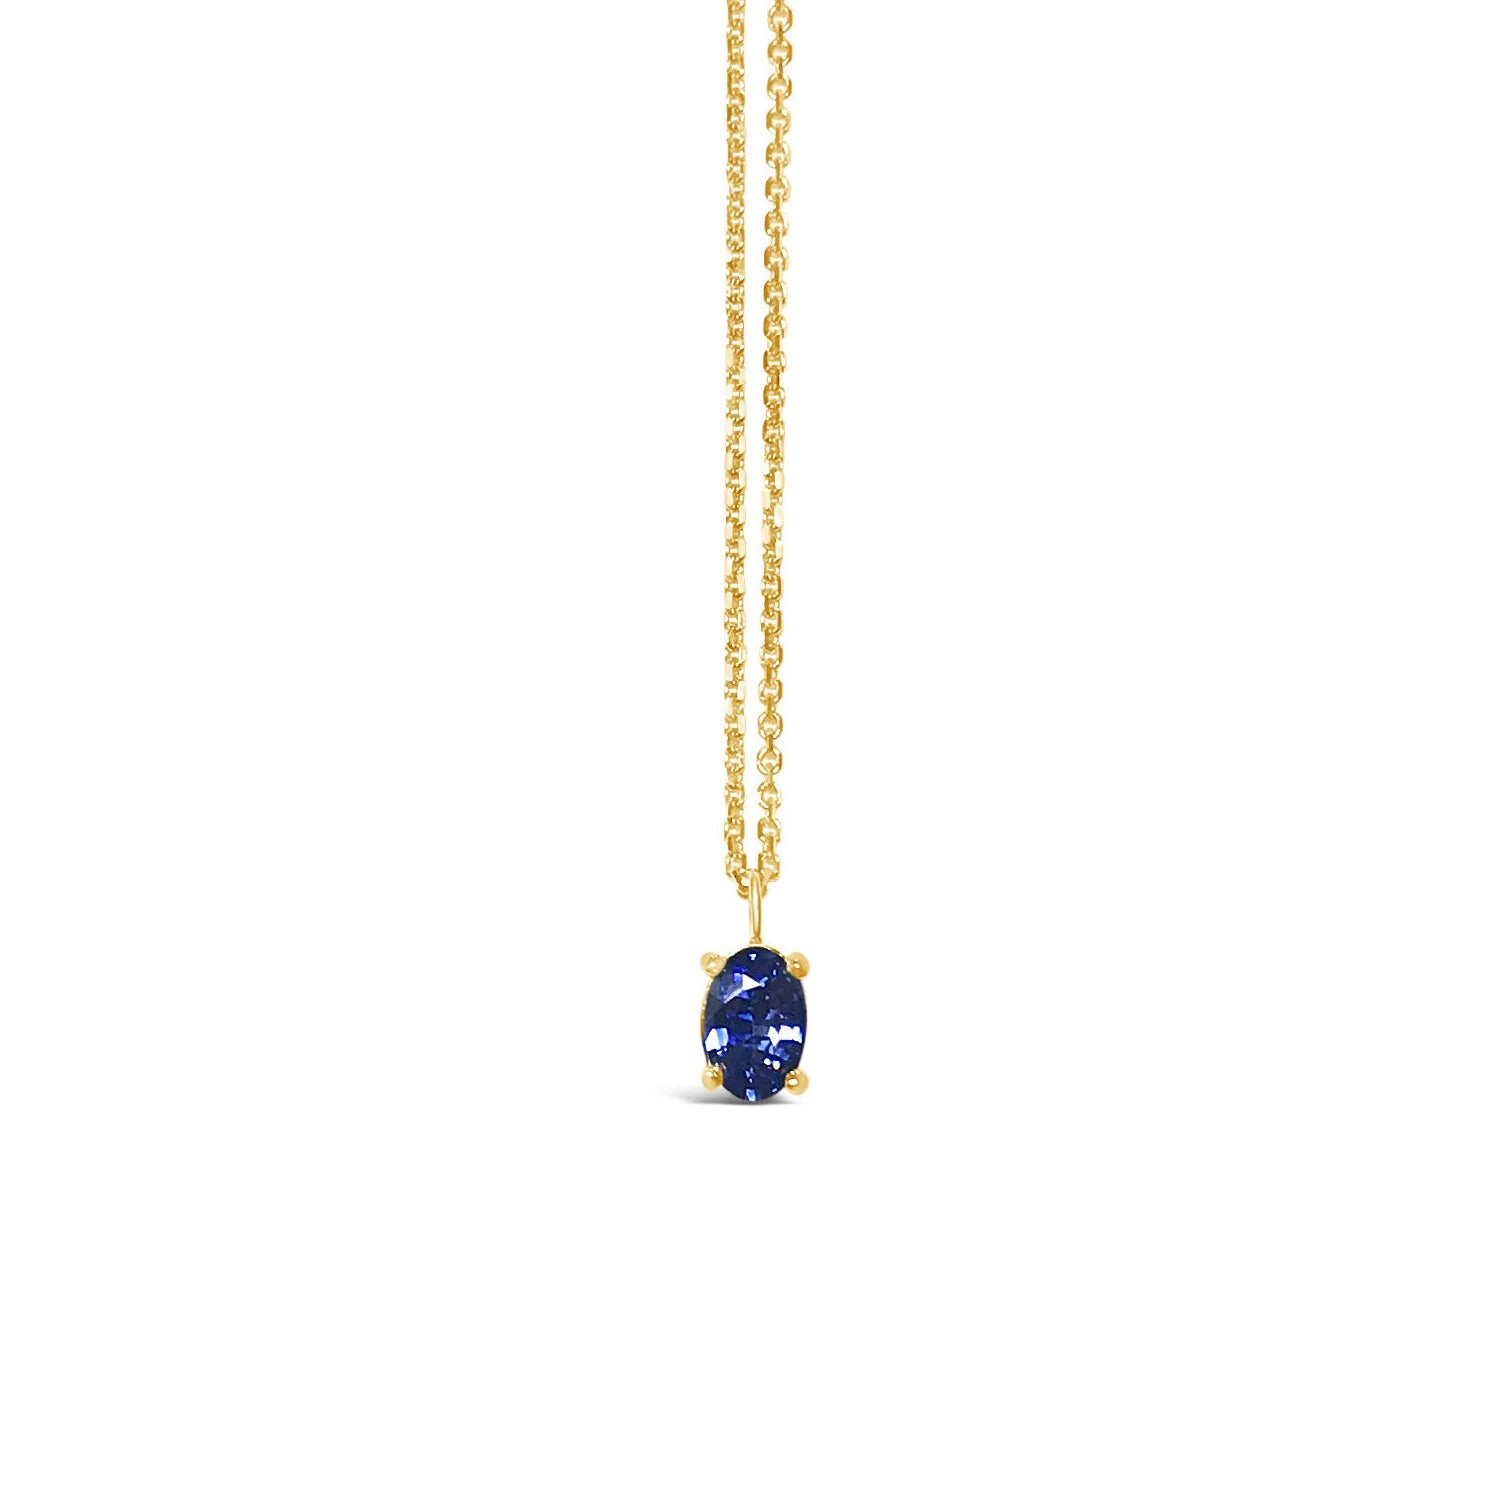 MERLINES || 0.5ct blue sapphire necklace in yellow gold 14k